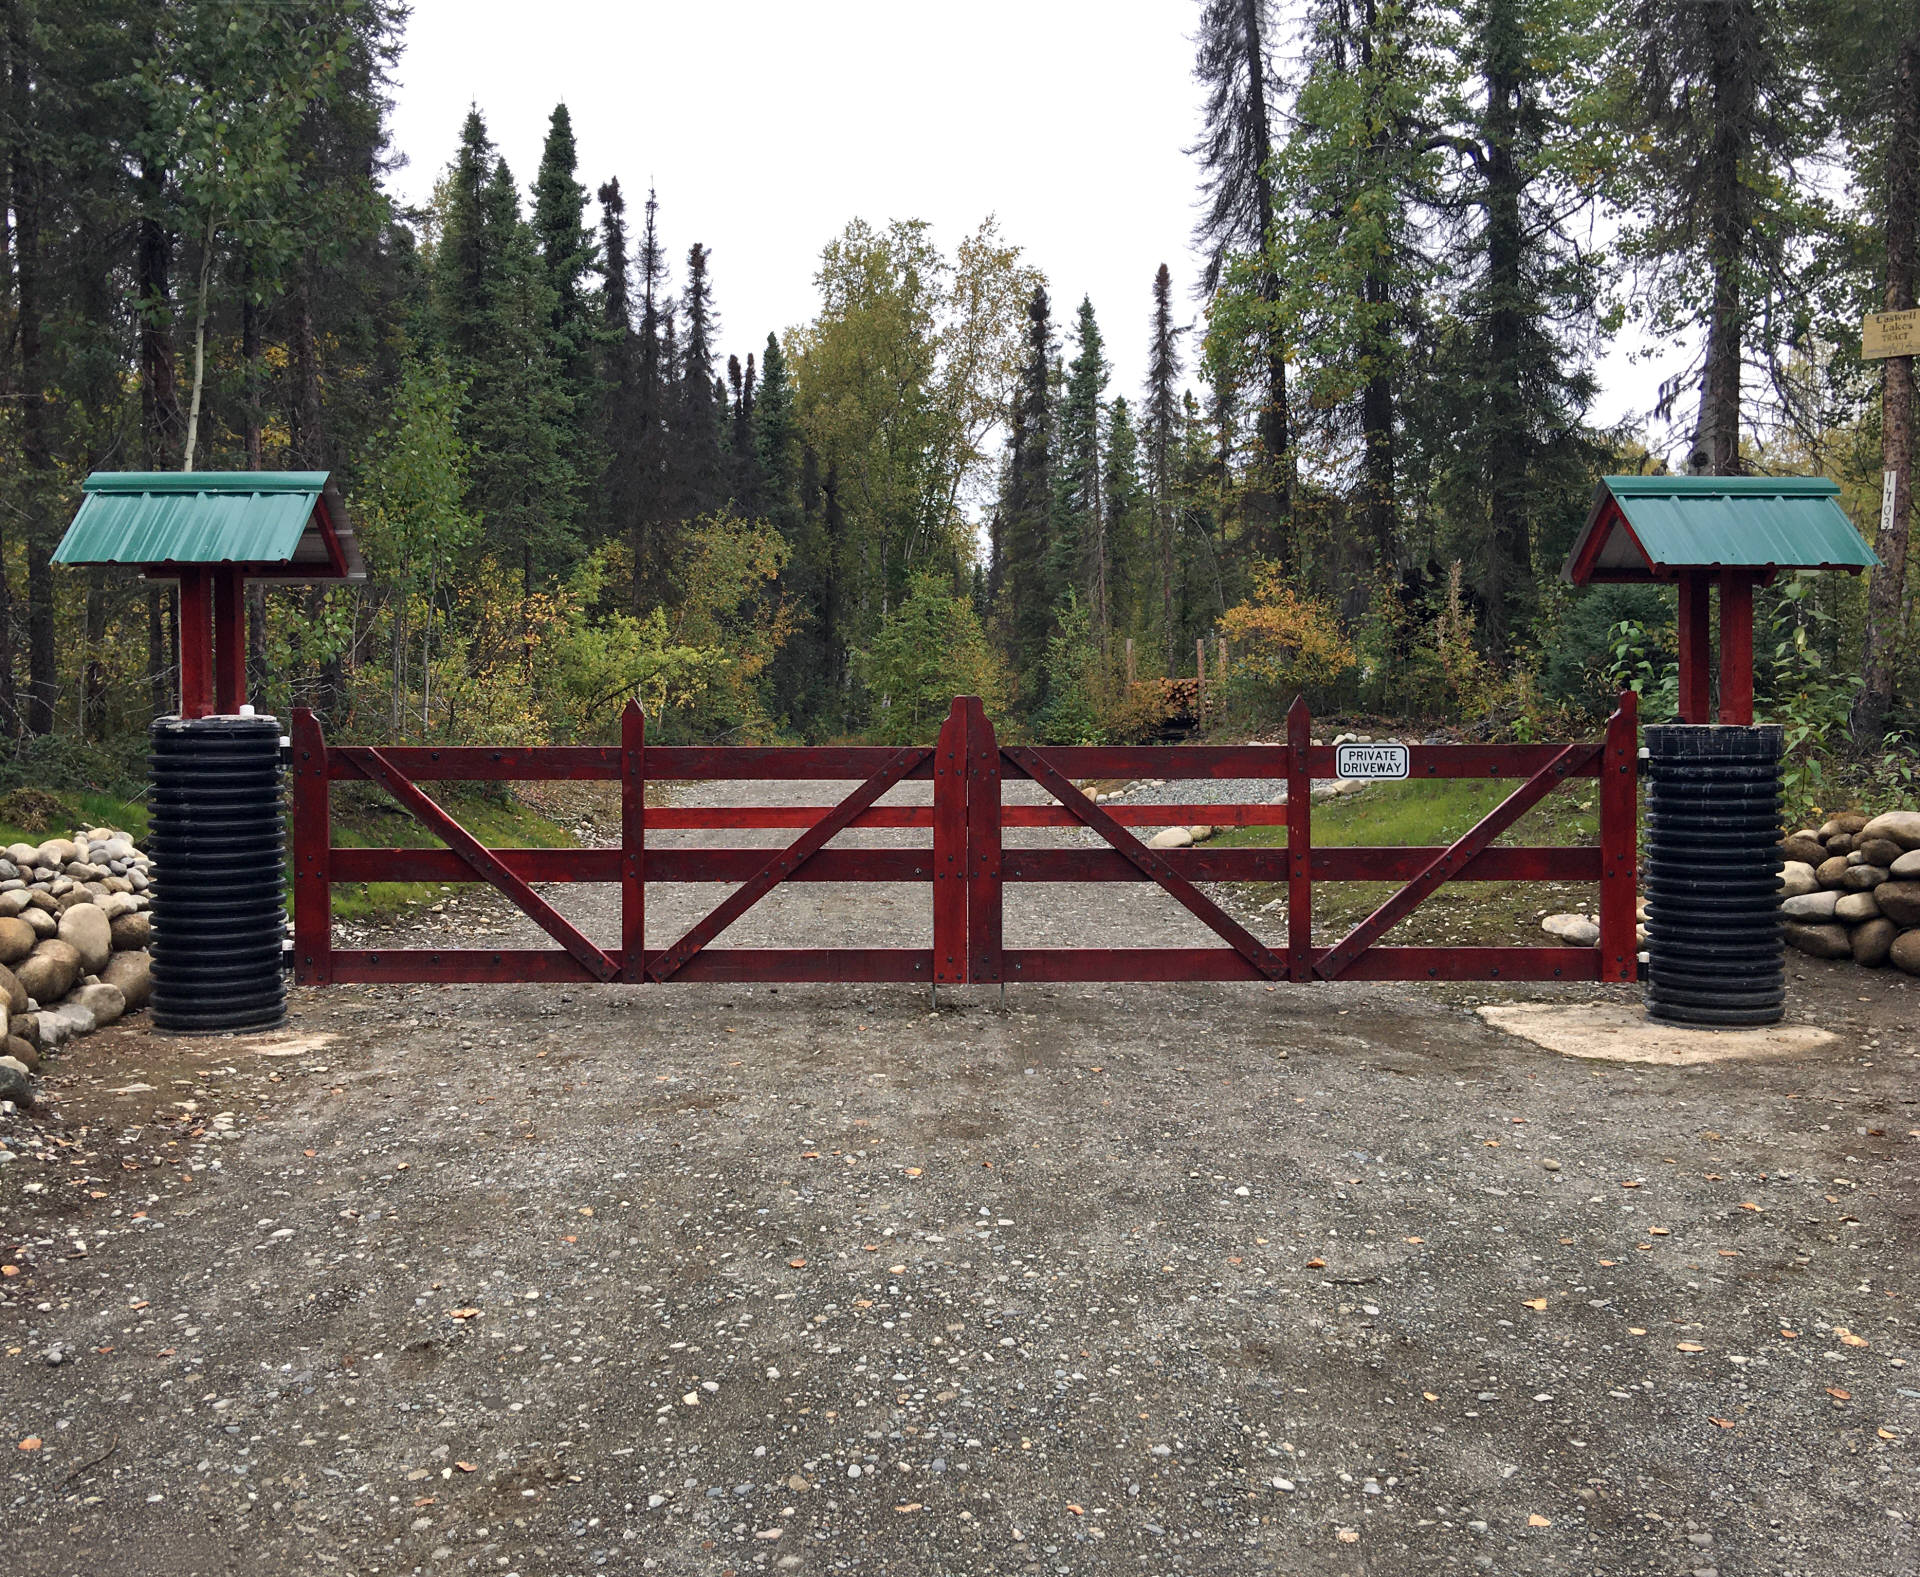 Gates on private driveway at the entrance to Soloview Park for your event or wedding venue, swing inwards. Access from E. Limitcatch Ave. The gates has a latch that can be opened from the inside.